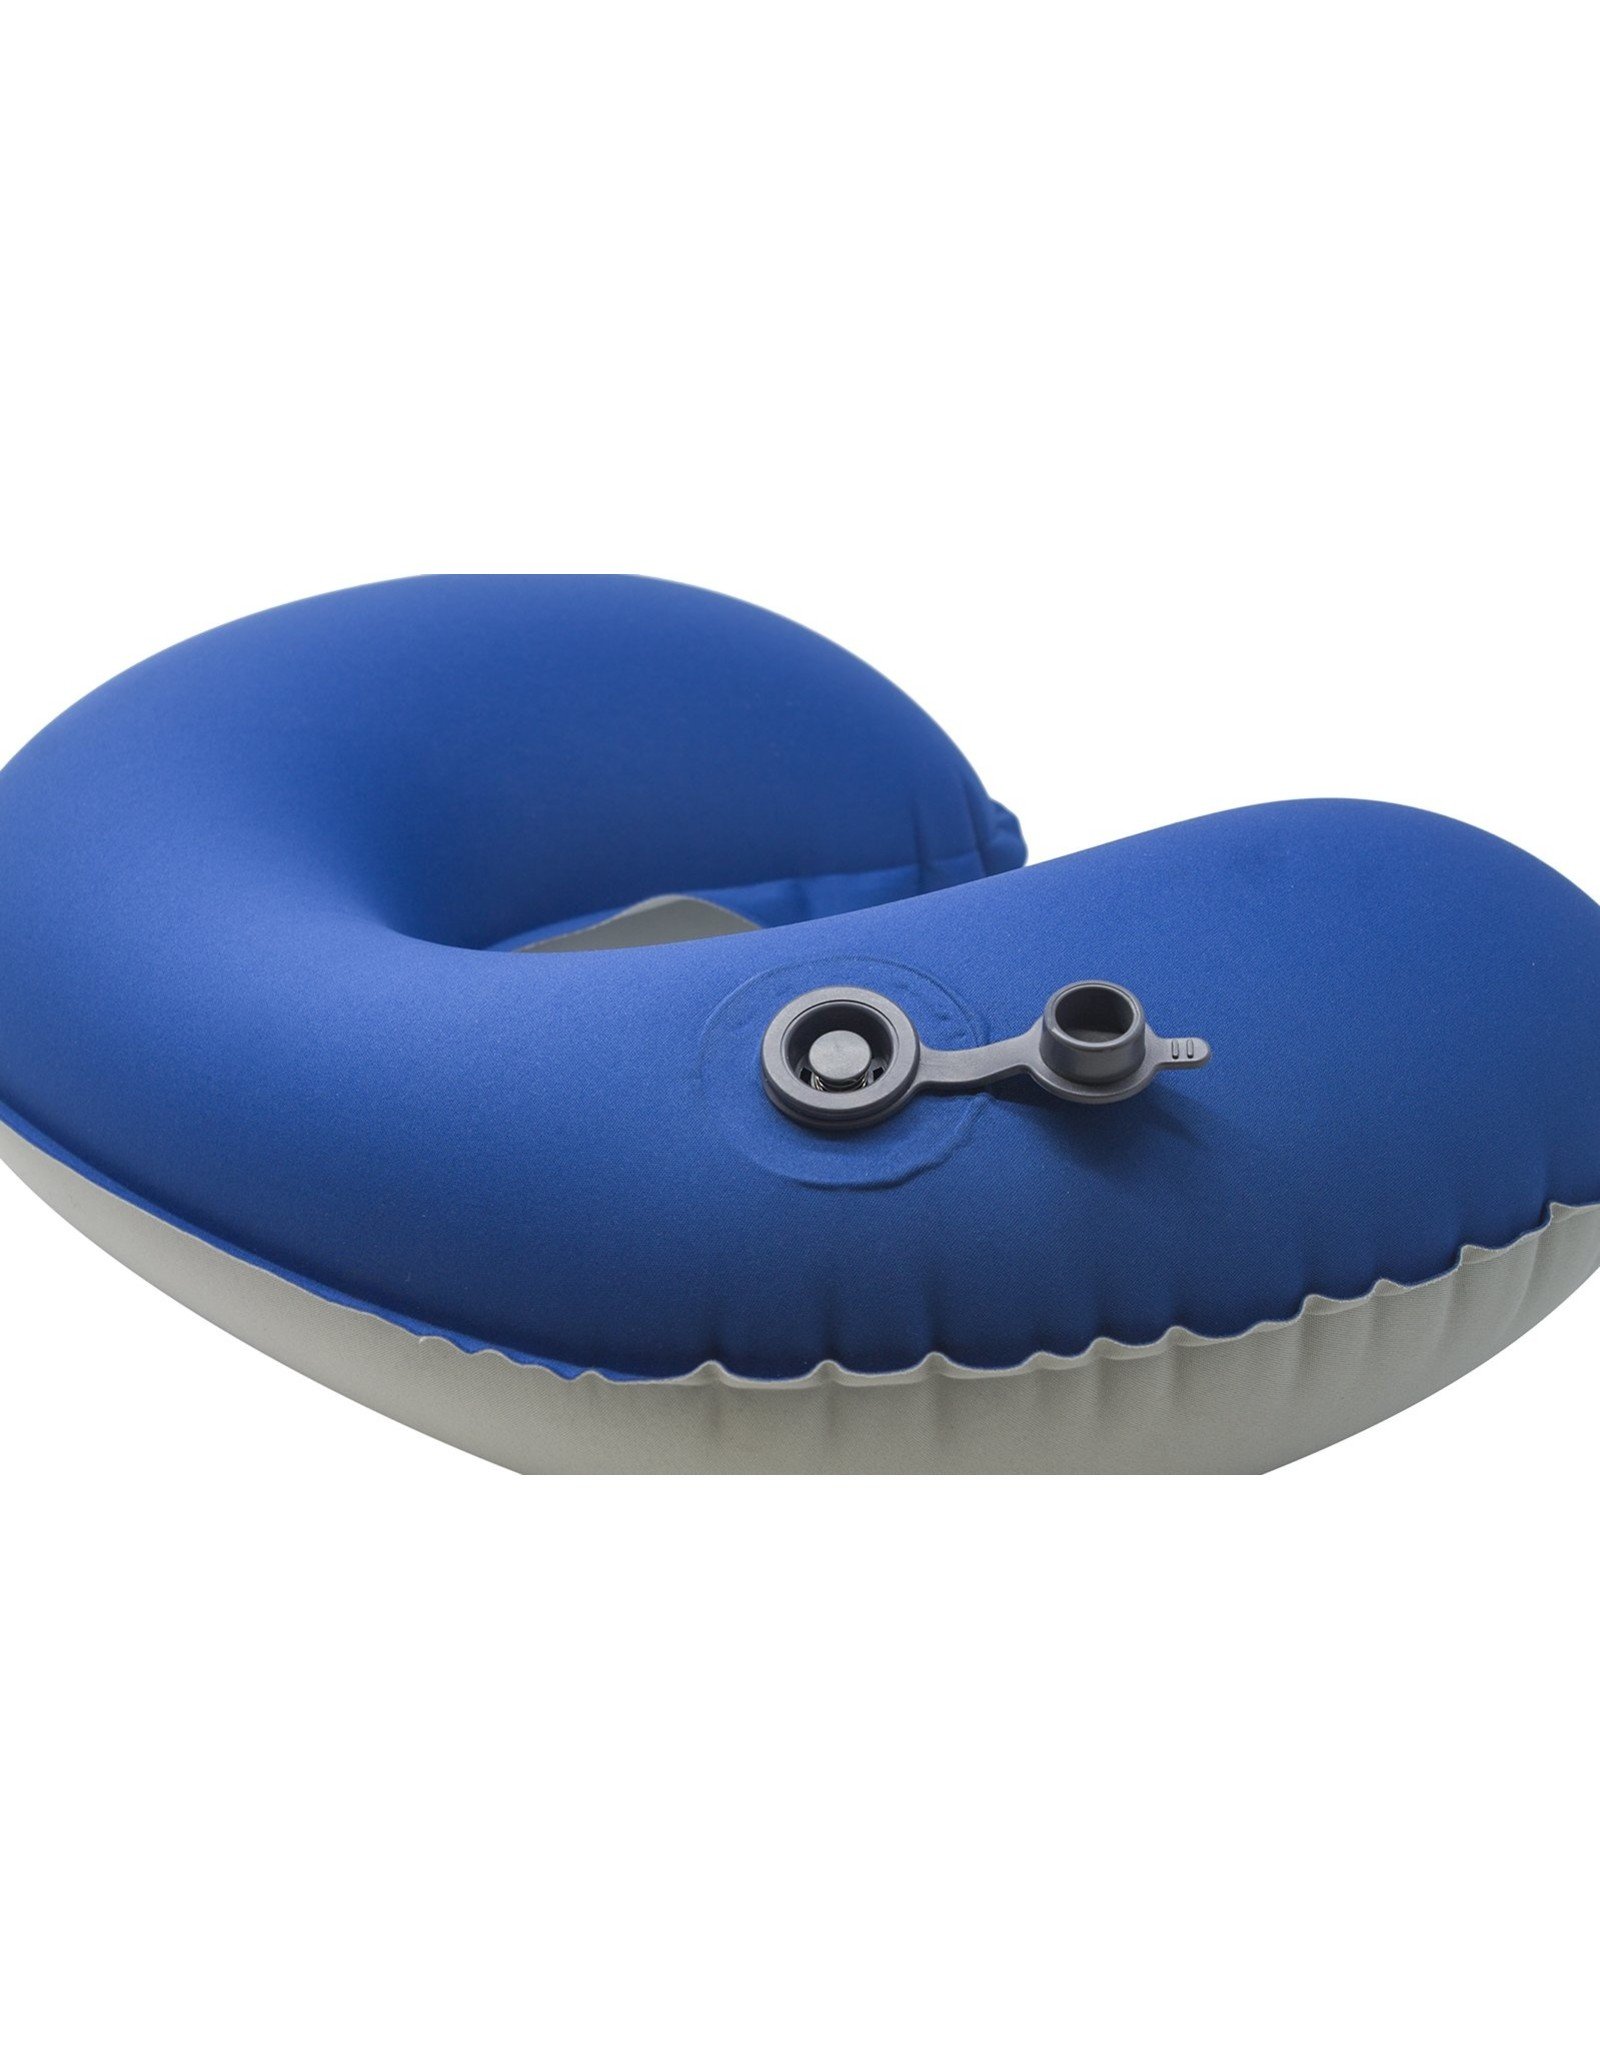 WORLD FAMOUS SALES TPU-LITE INFLATEABLE NECK PILLOW